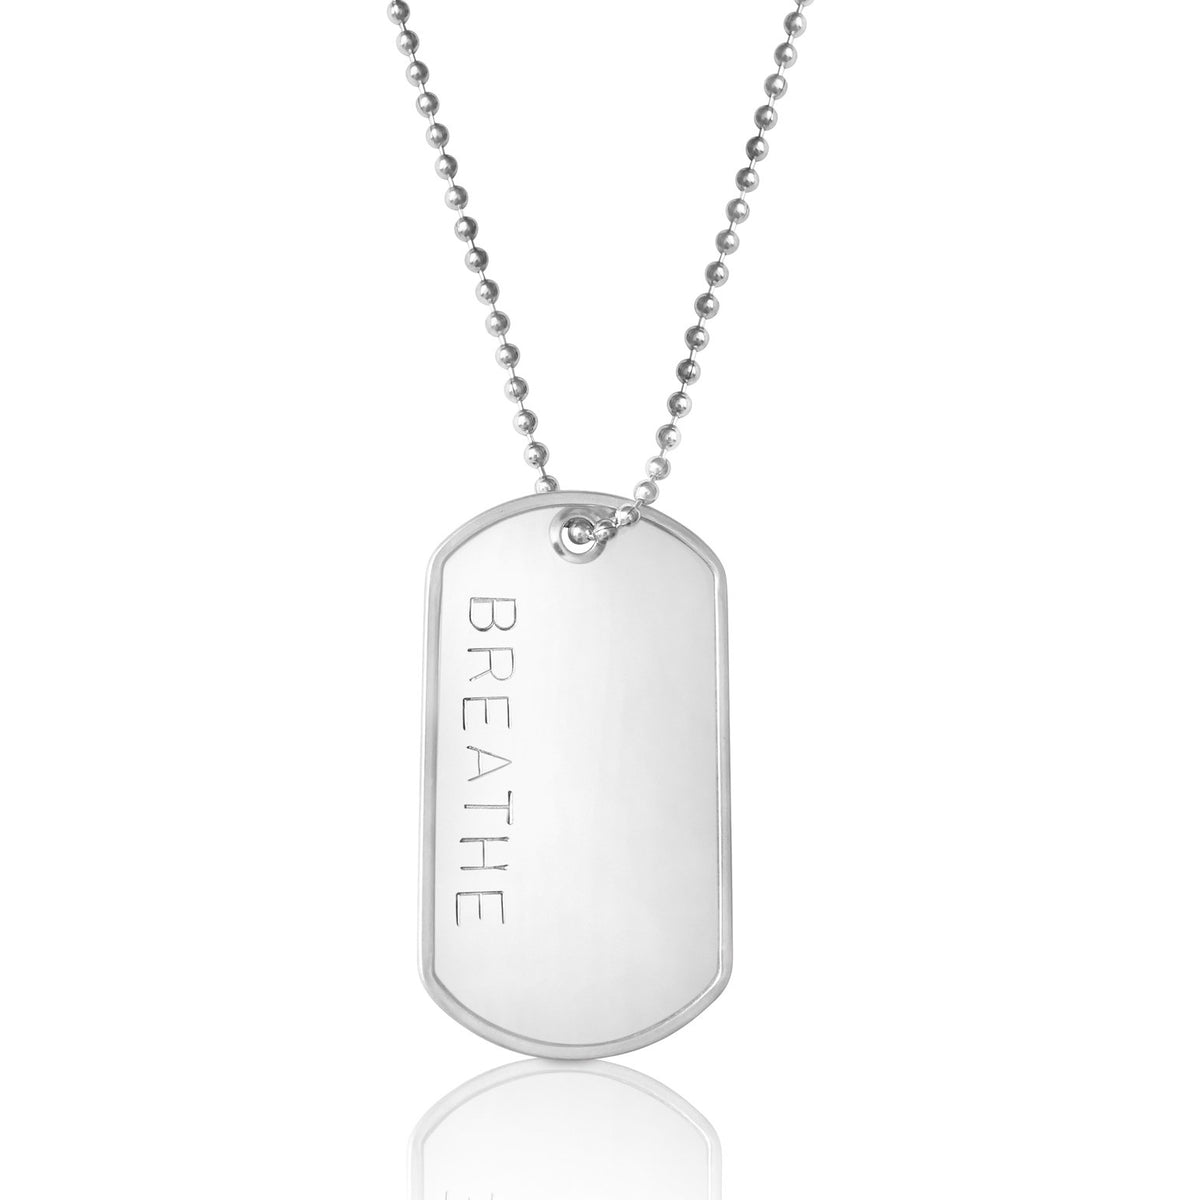 BREATHE - Stainless Steel Dog Tag Necklace. Yoga Inspired Military Style